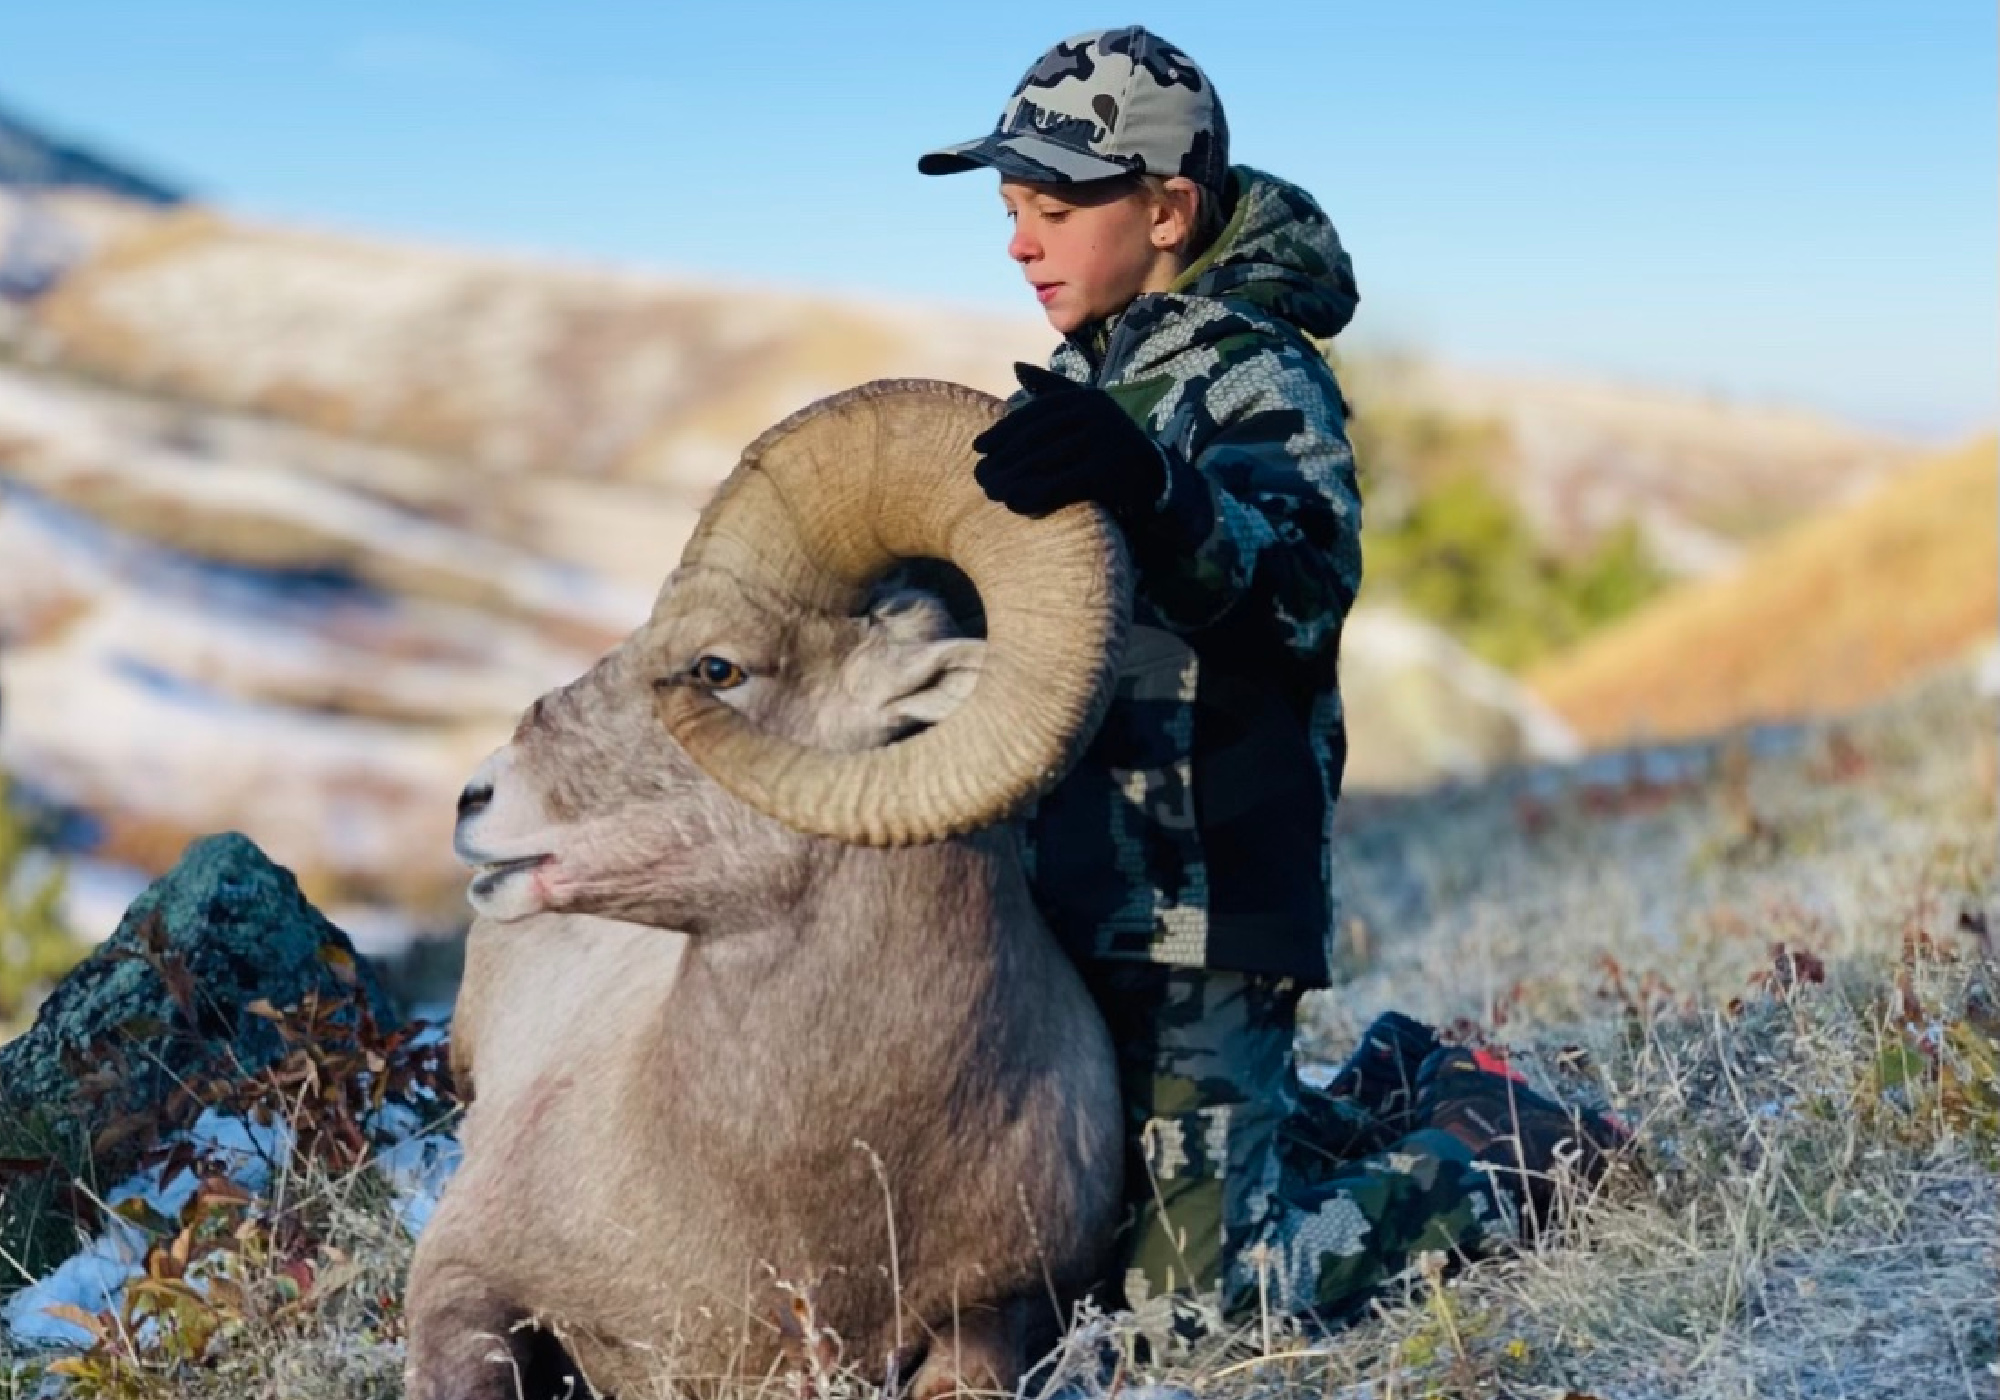 Cami Cunningham became the youngest female to complete the North American Sheep Grand Slam